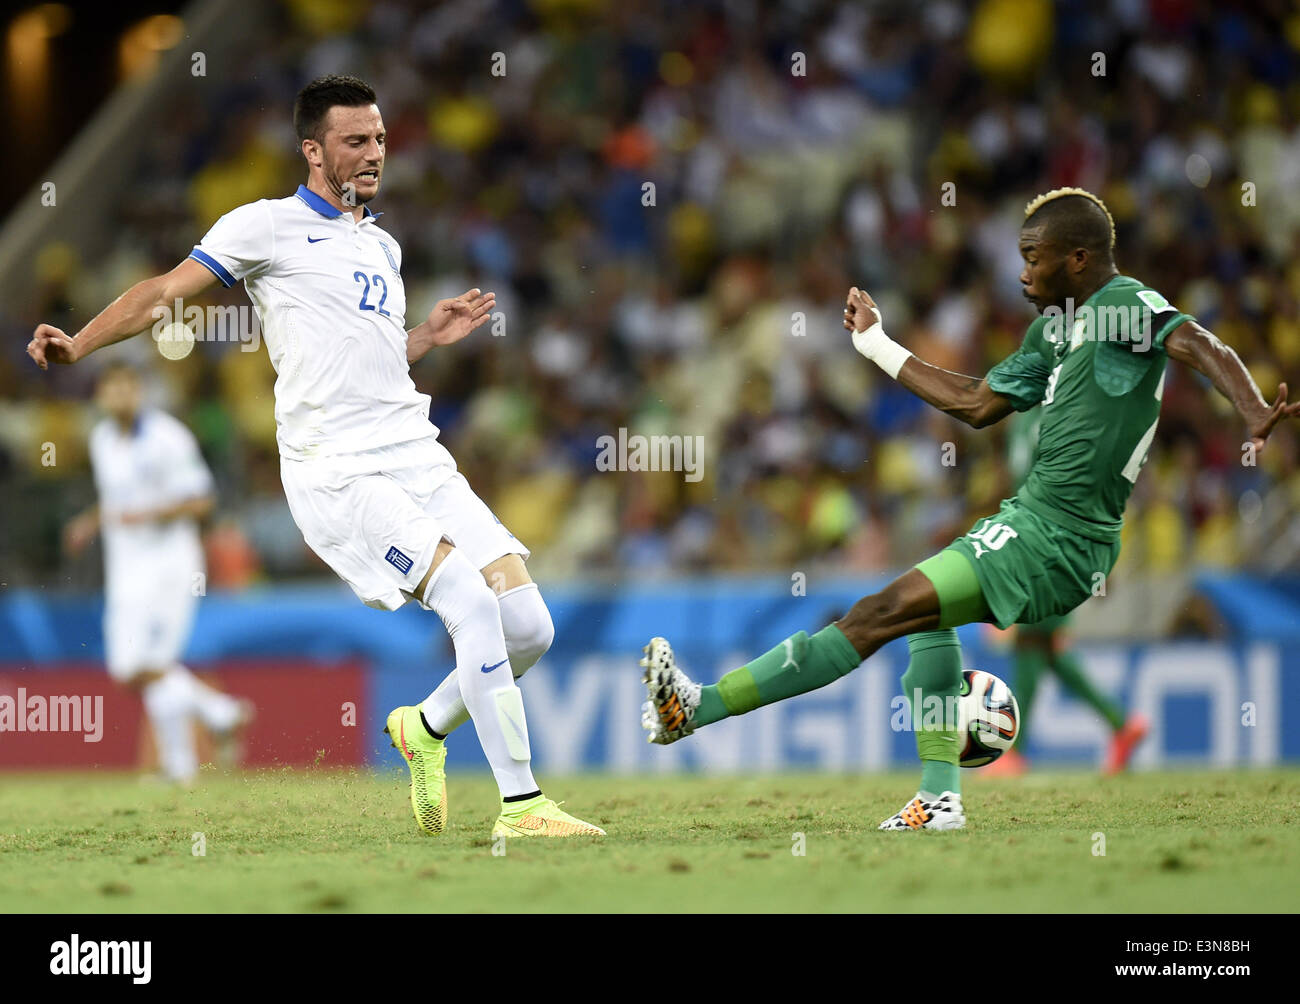 Fortaleza, Brazil. 24th June, 2014. Greece's Andreas Samaris (L) shoots during a Group C match between Greece and Cote d'Ivoire of 2014 FIFA World Cup at the Estadio Castelao Stadium in Fortaleza, Brazil, June 24, 2014. Credit:  Yang Lei/Xinhua/Alamy Live News Stock Photo